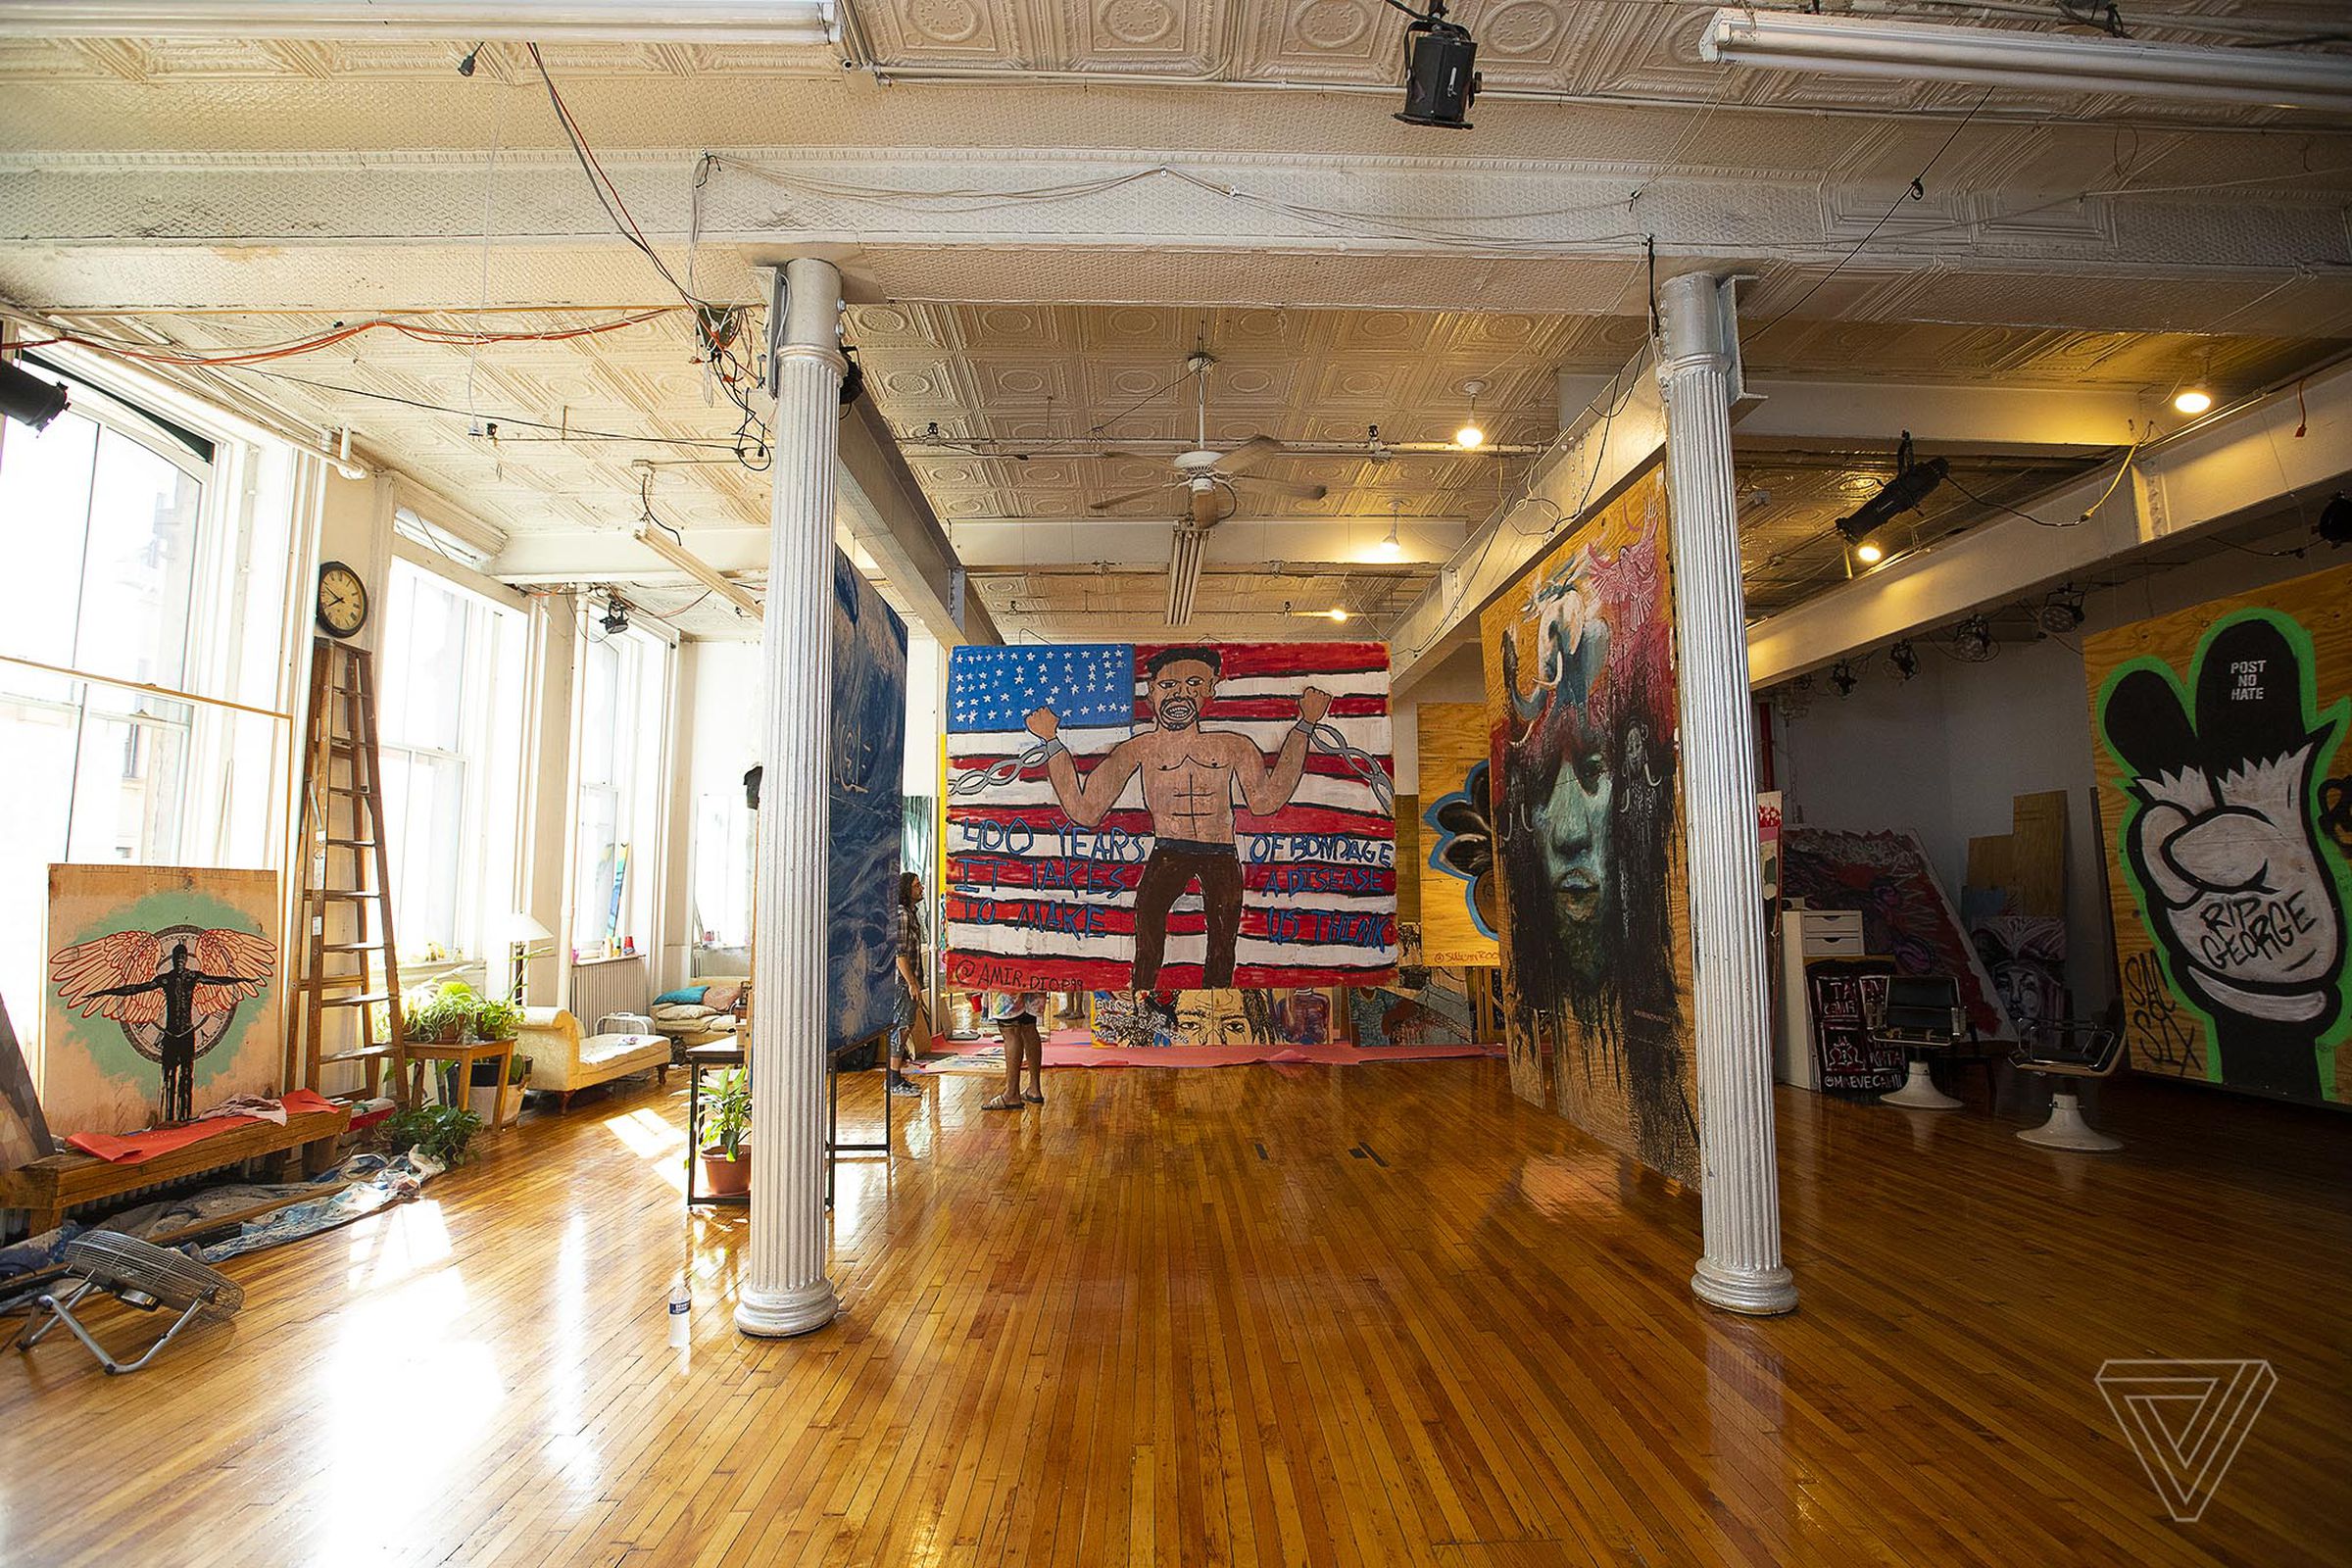 Amir Diop’s work that once boarded up the side of a business was hung inside the loft space.